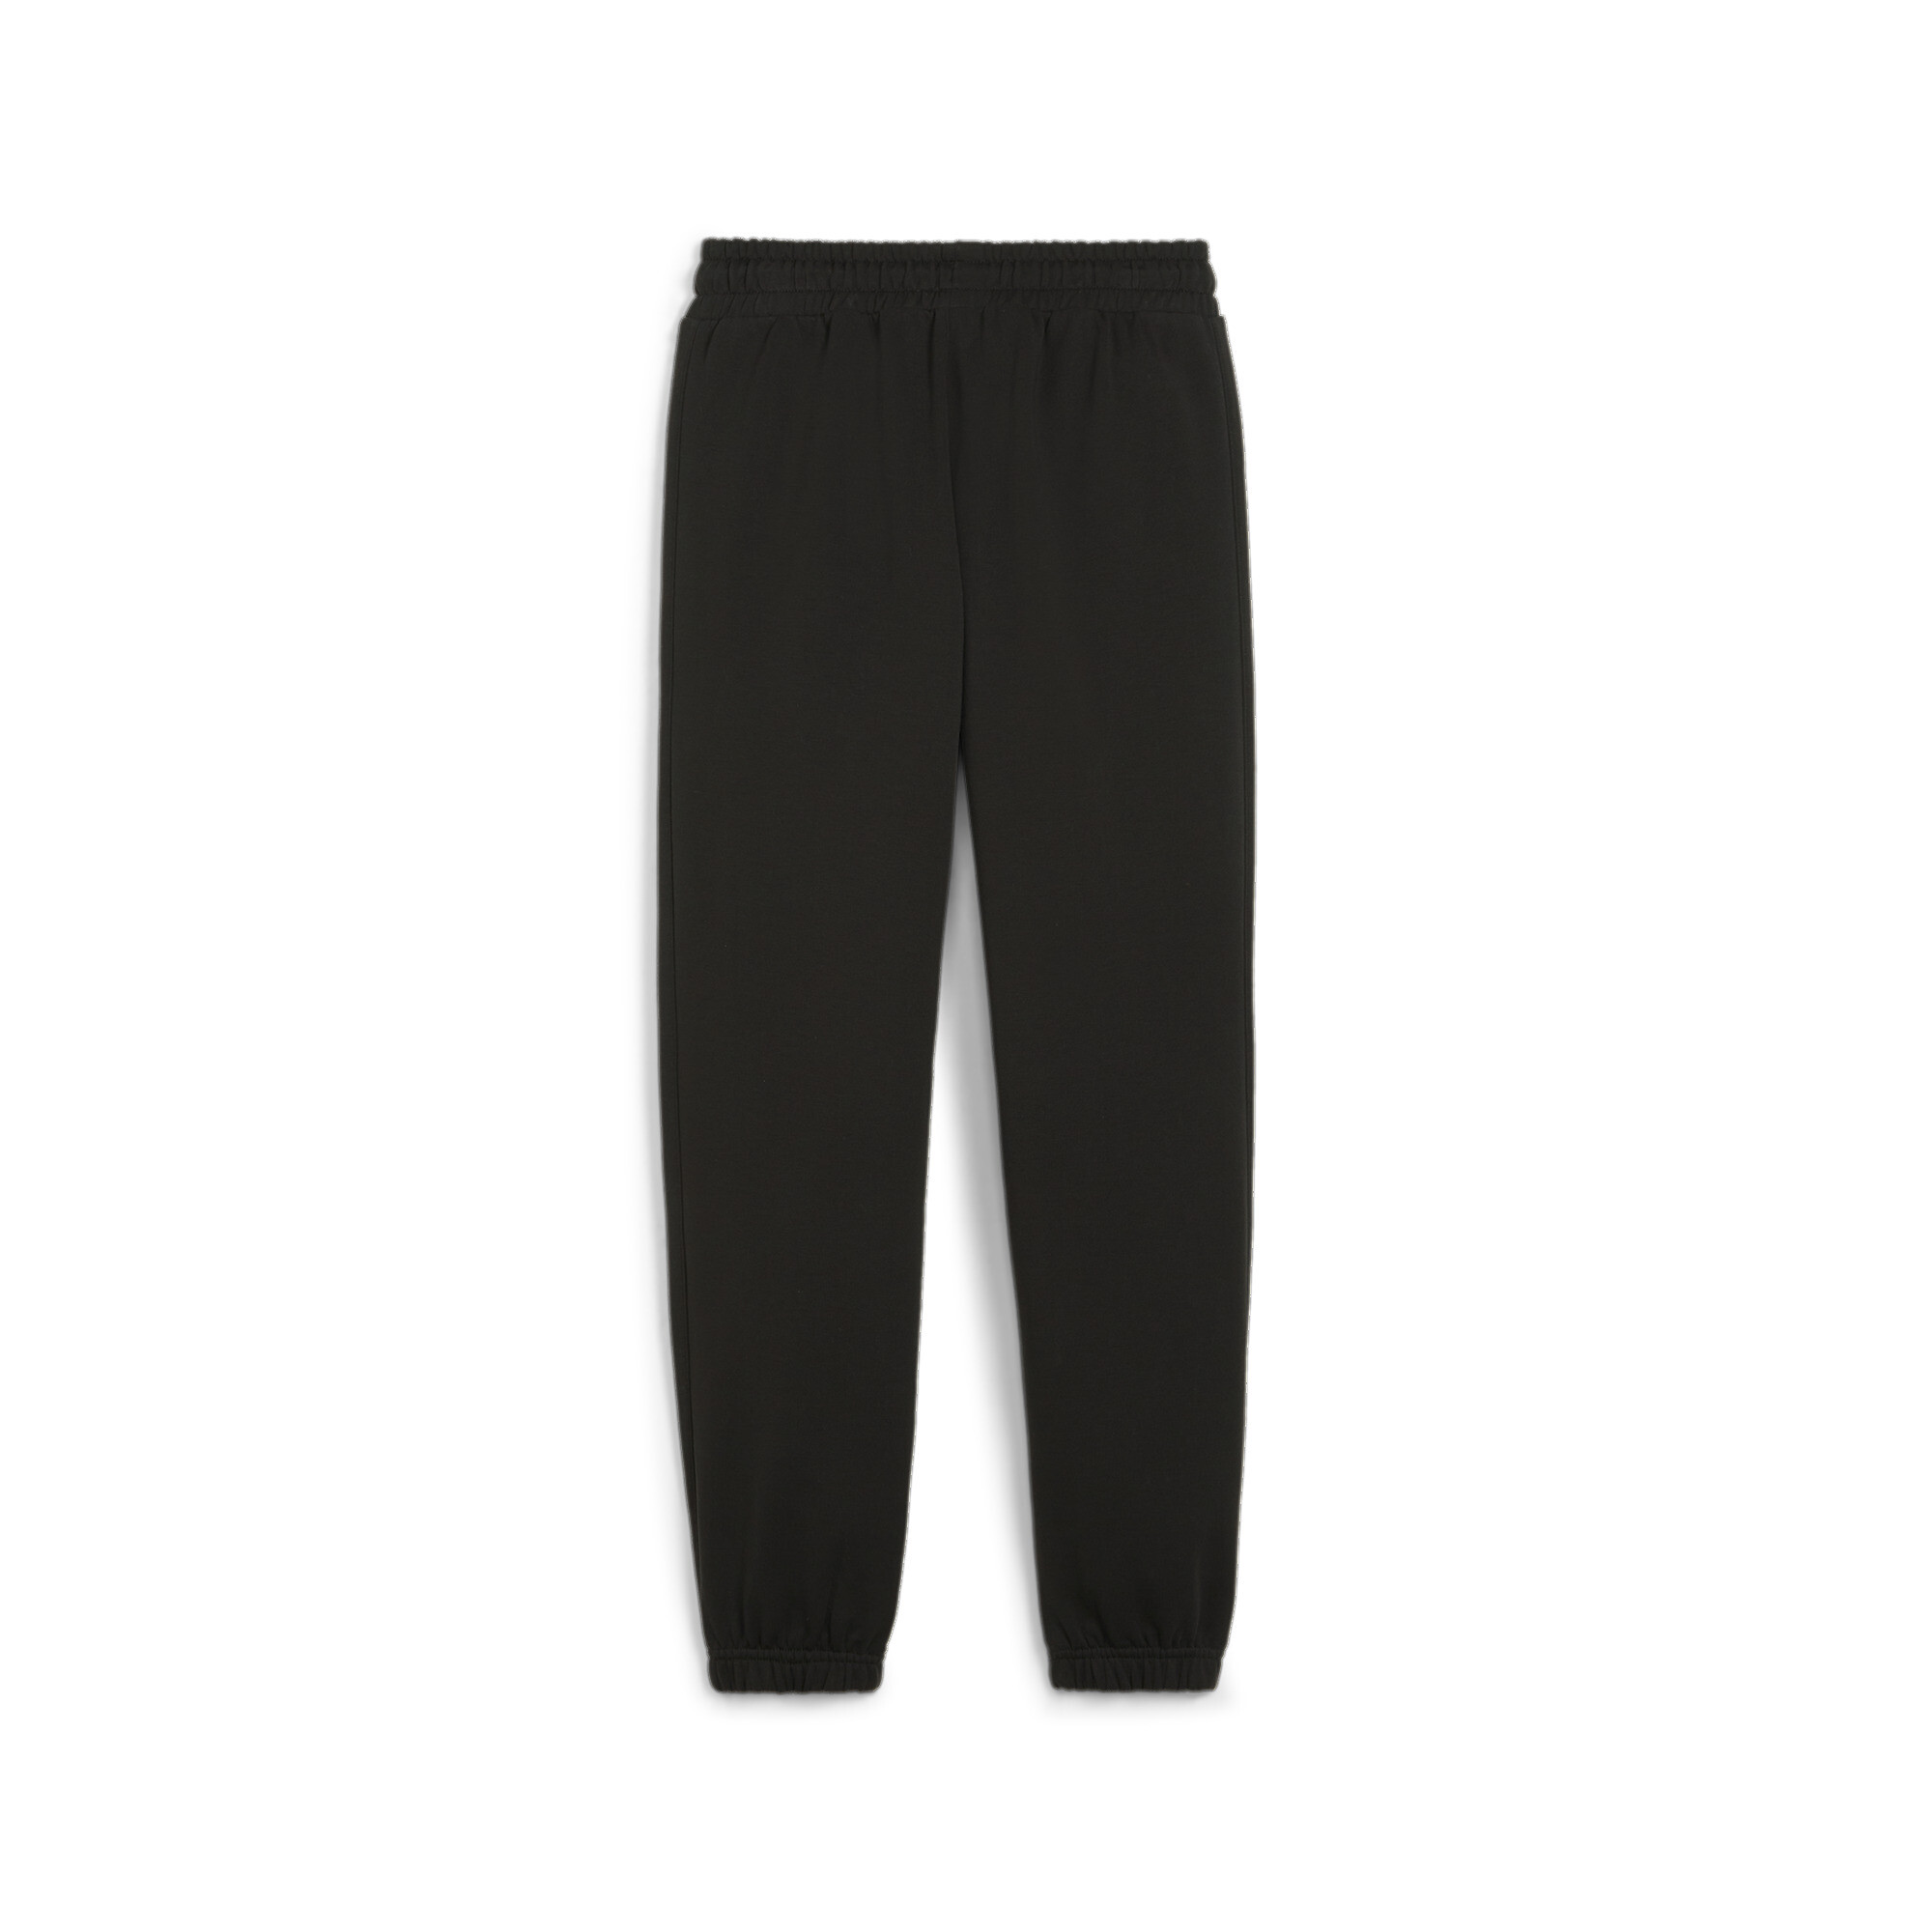 PUMA FOR THE FANBASE Sweatpants In Black, Size 7-8 Youth